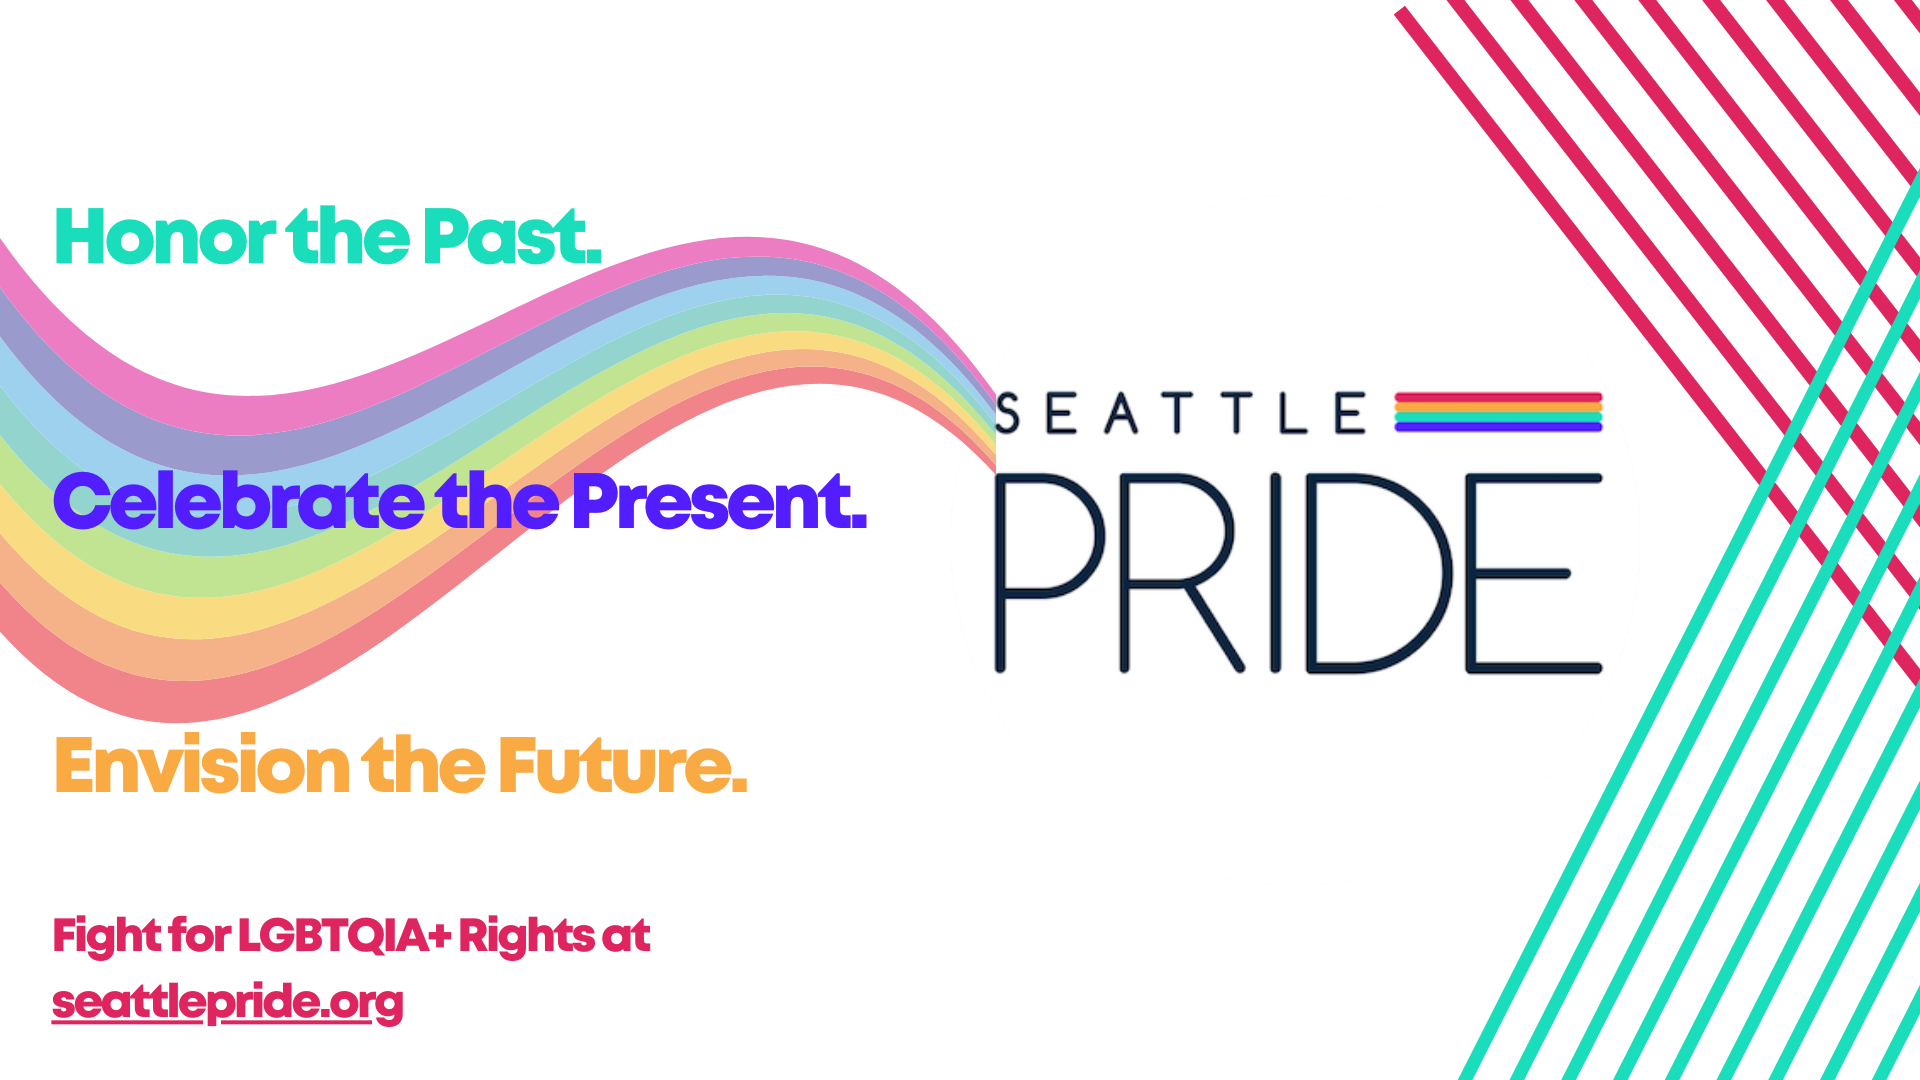 Seattle Pride Ad 1920 x 1080.png